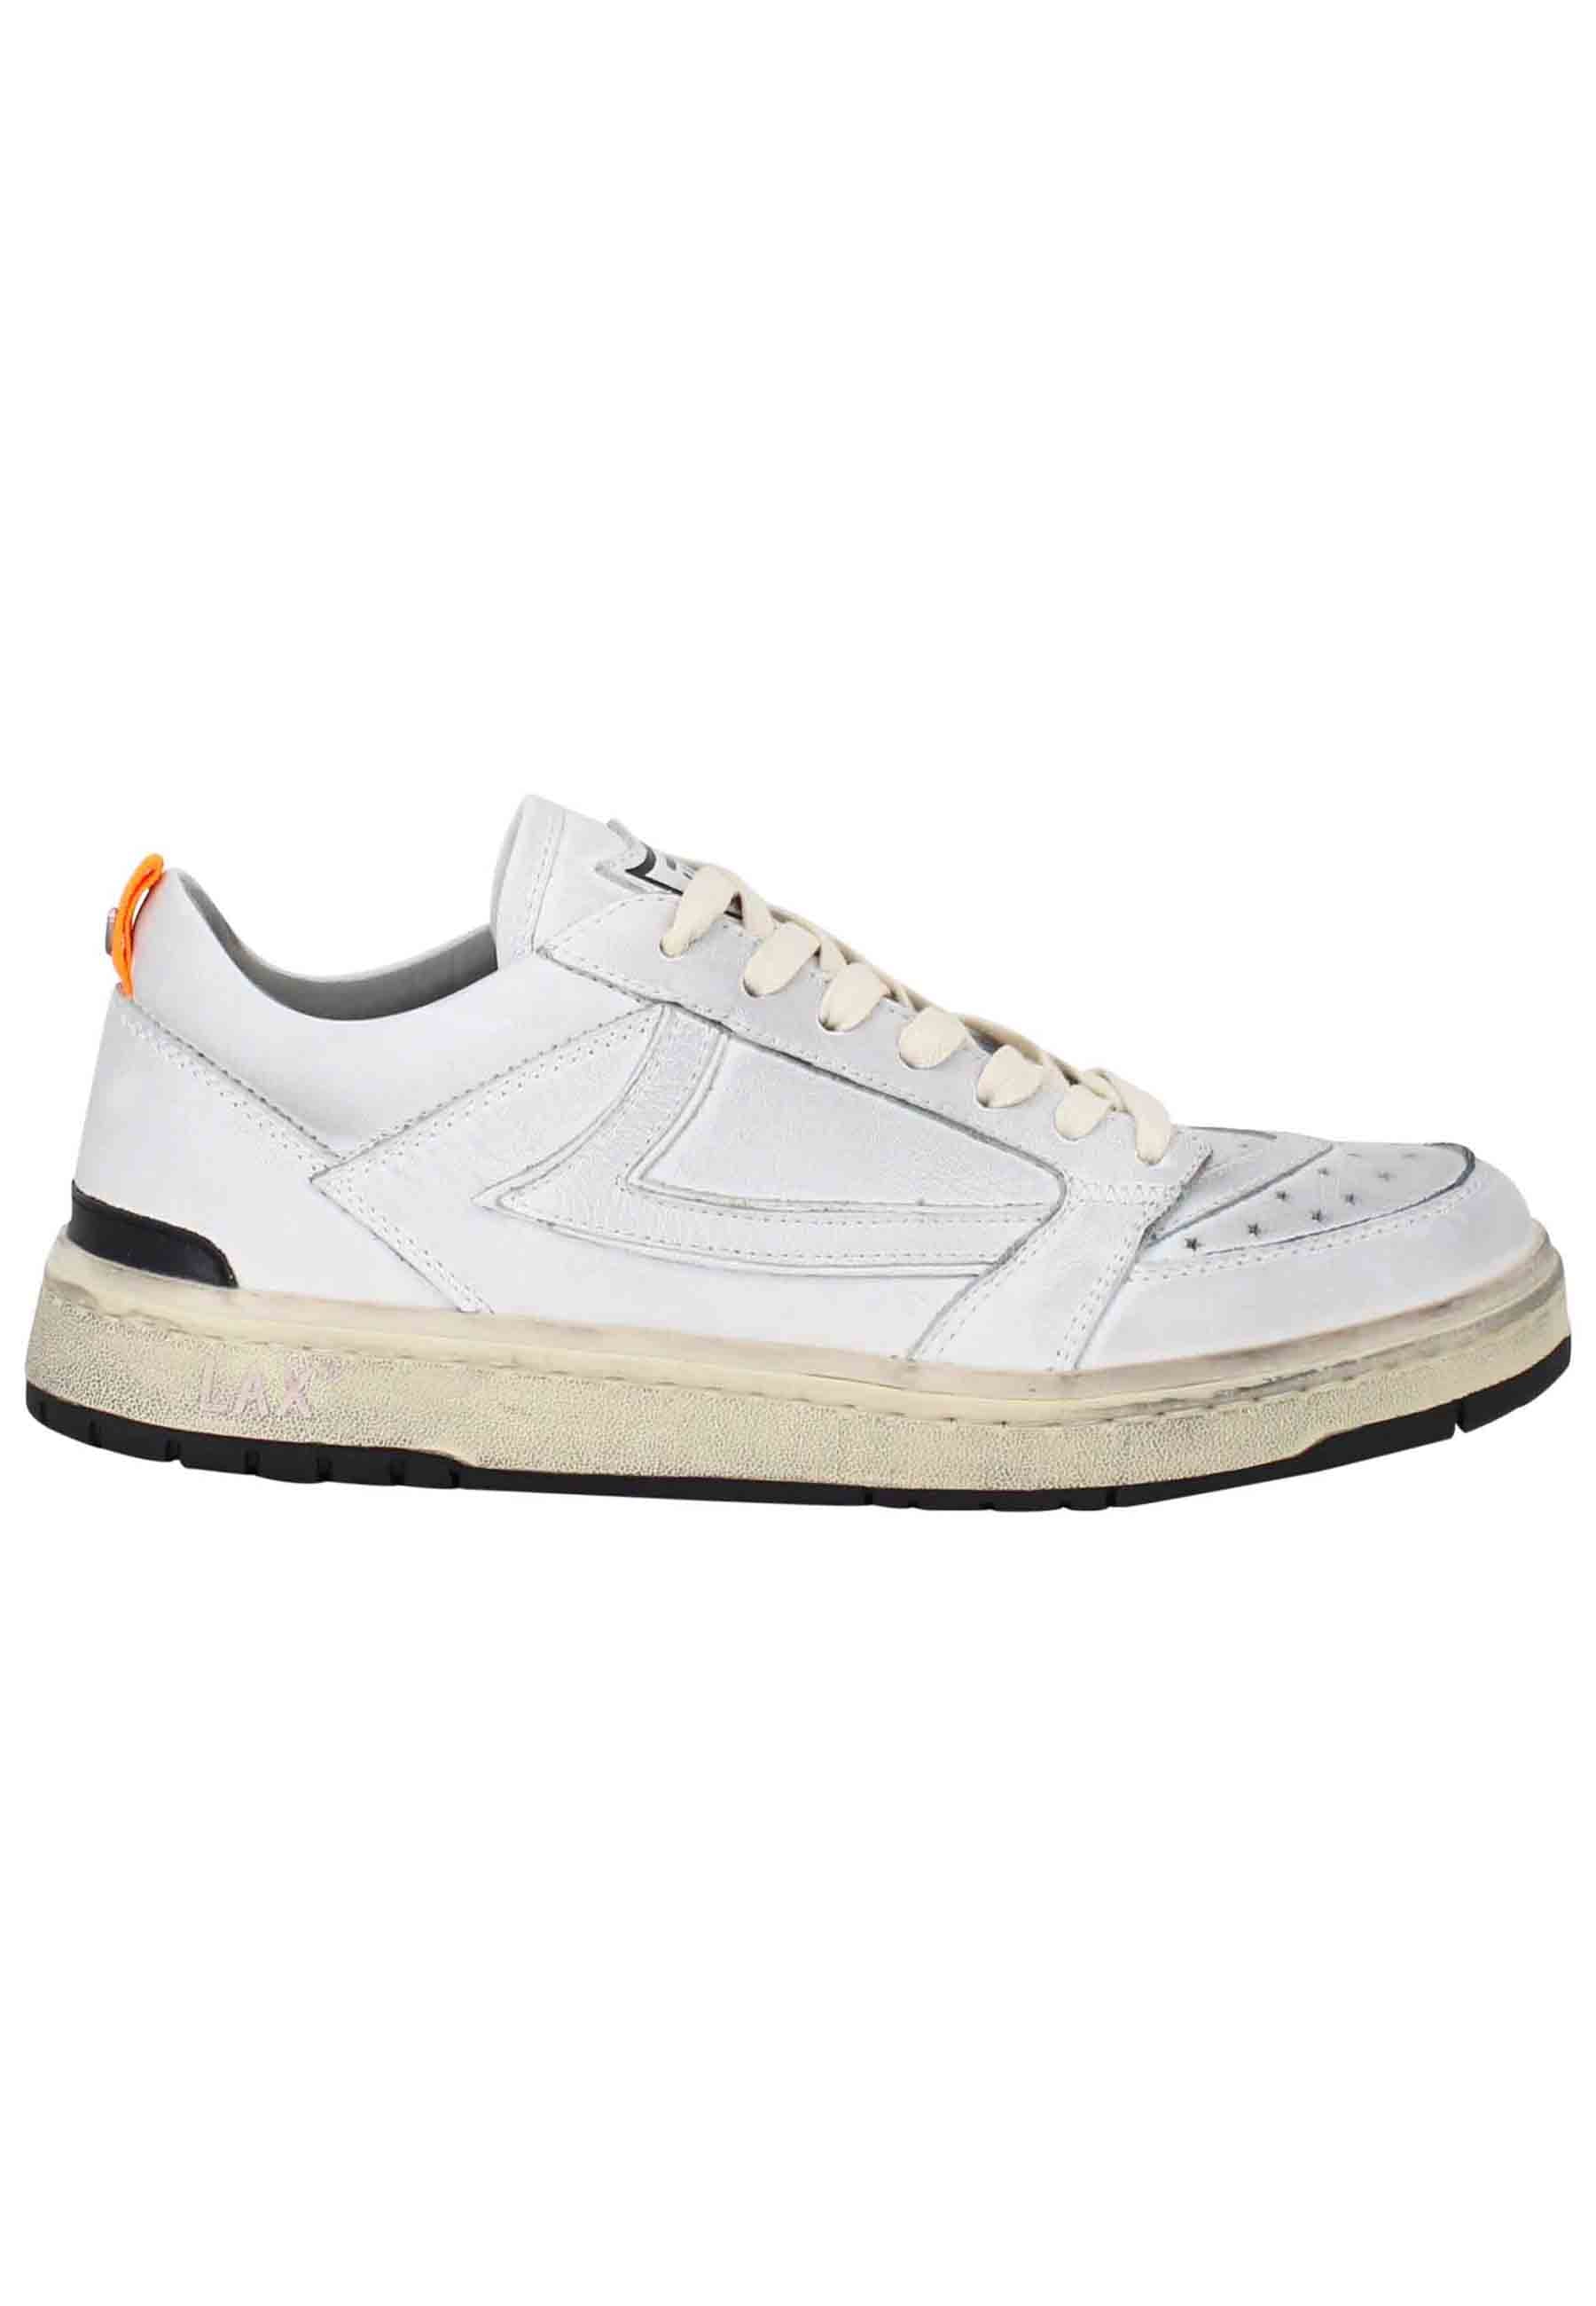 Starlight Shield men's sneakers in vintage white leather